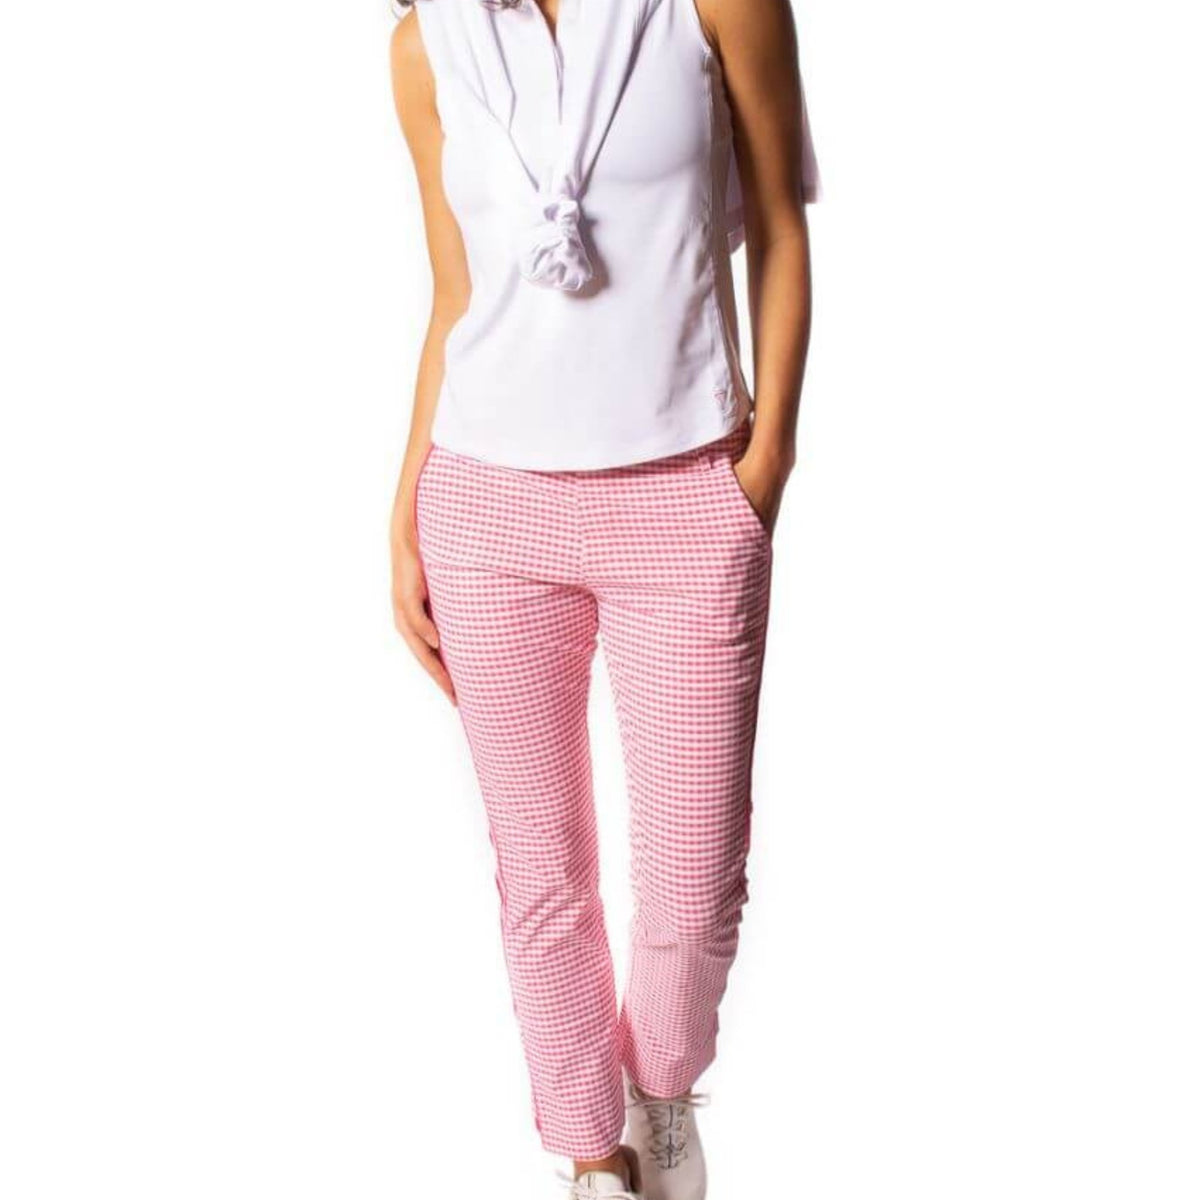 Checkered Stretch Ankle Pant - Hot Pink/White - Fairway Fittings